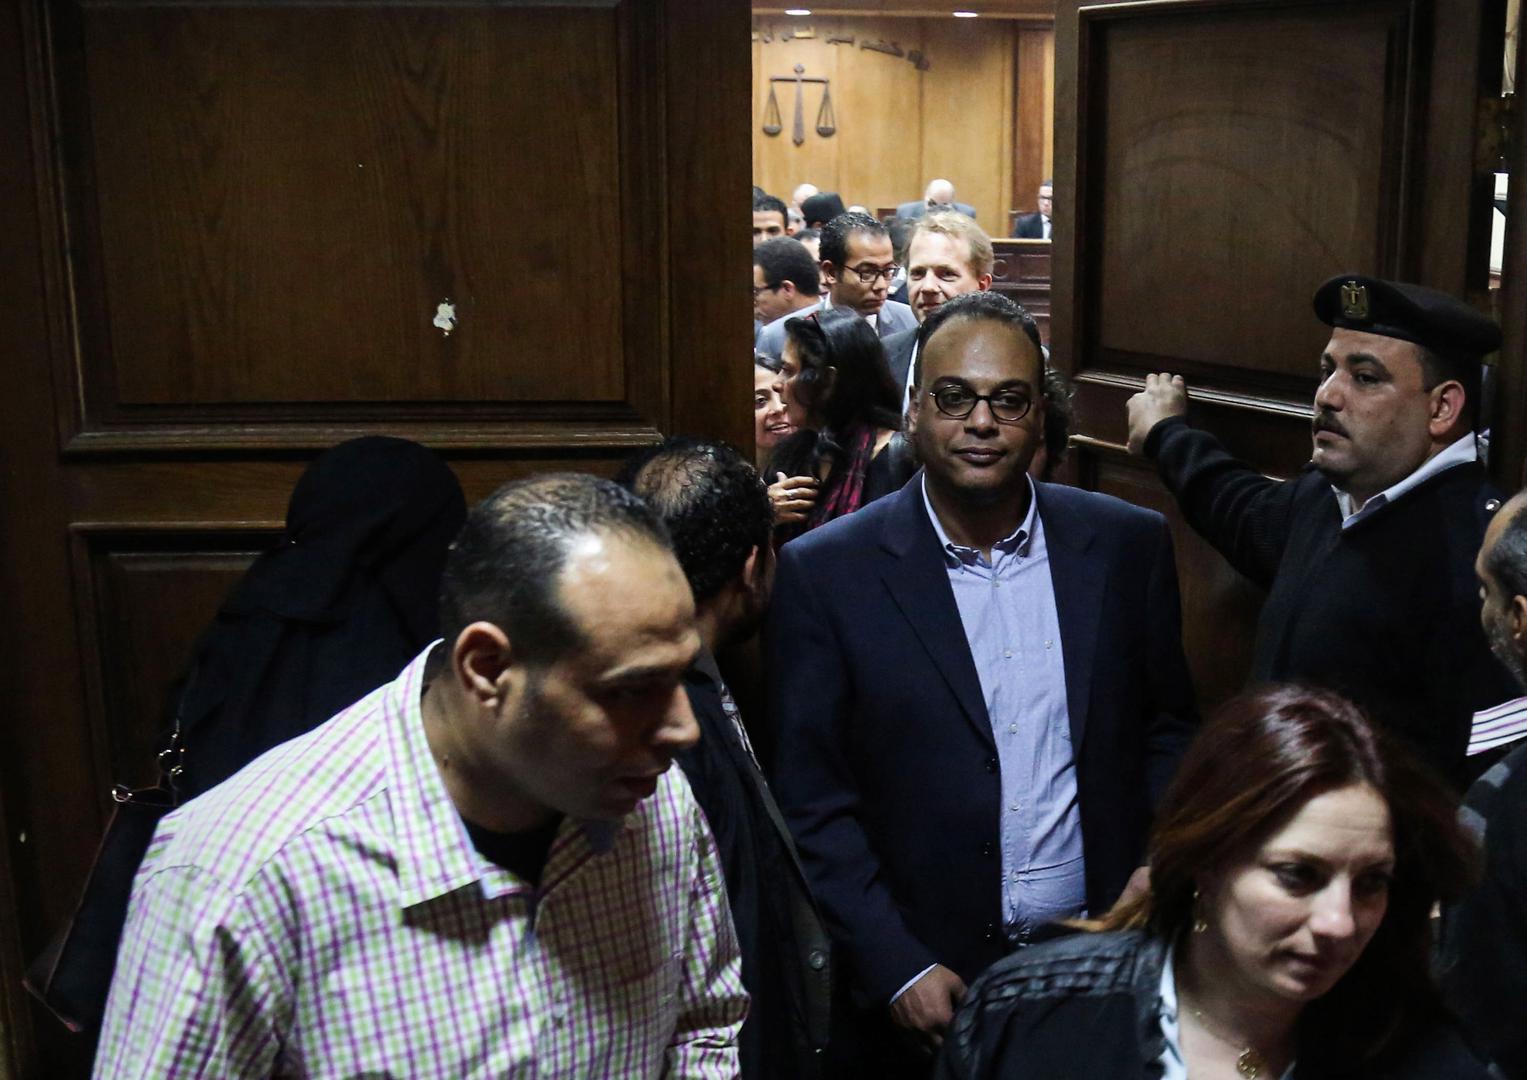 Prominent rights activist and journalist Hossam Baghat, center, leaves a courtroom at the Cairo Criminal Court on March 24, 2016. In recent years, Egyptian authorities have relentlessly prosecuted leading human rights and civil society activists for their